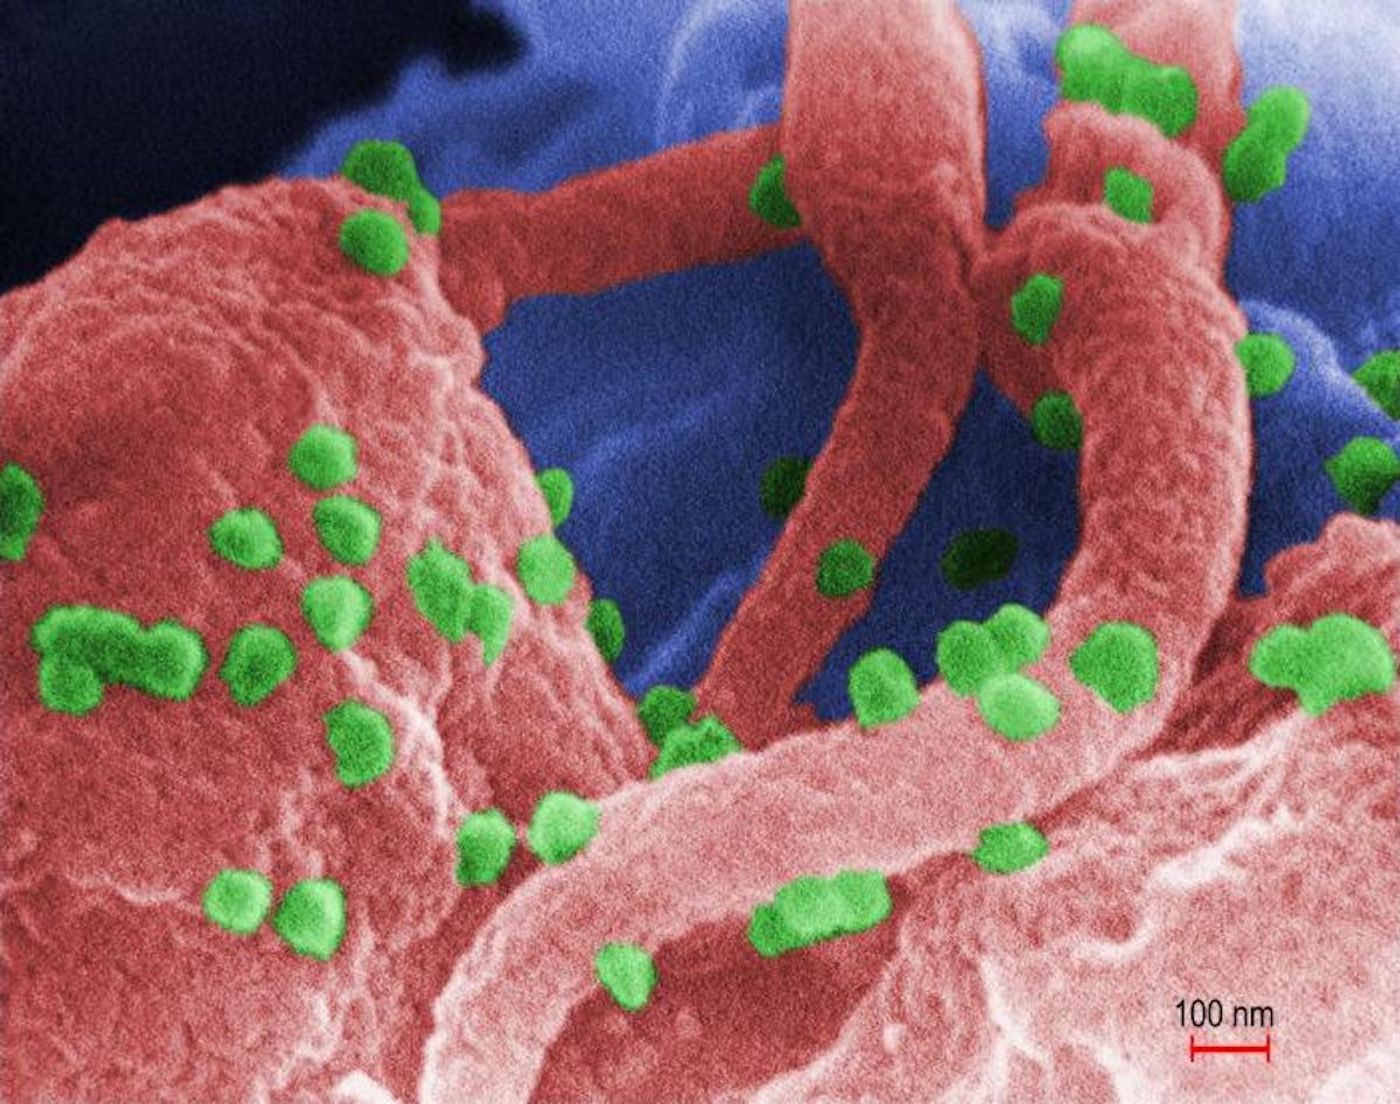 Green particles show the human immunodeficiency virus (HIV-1), in co-cultured with human lymphocytes.